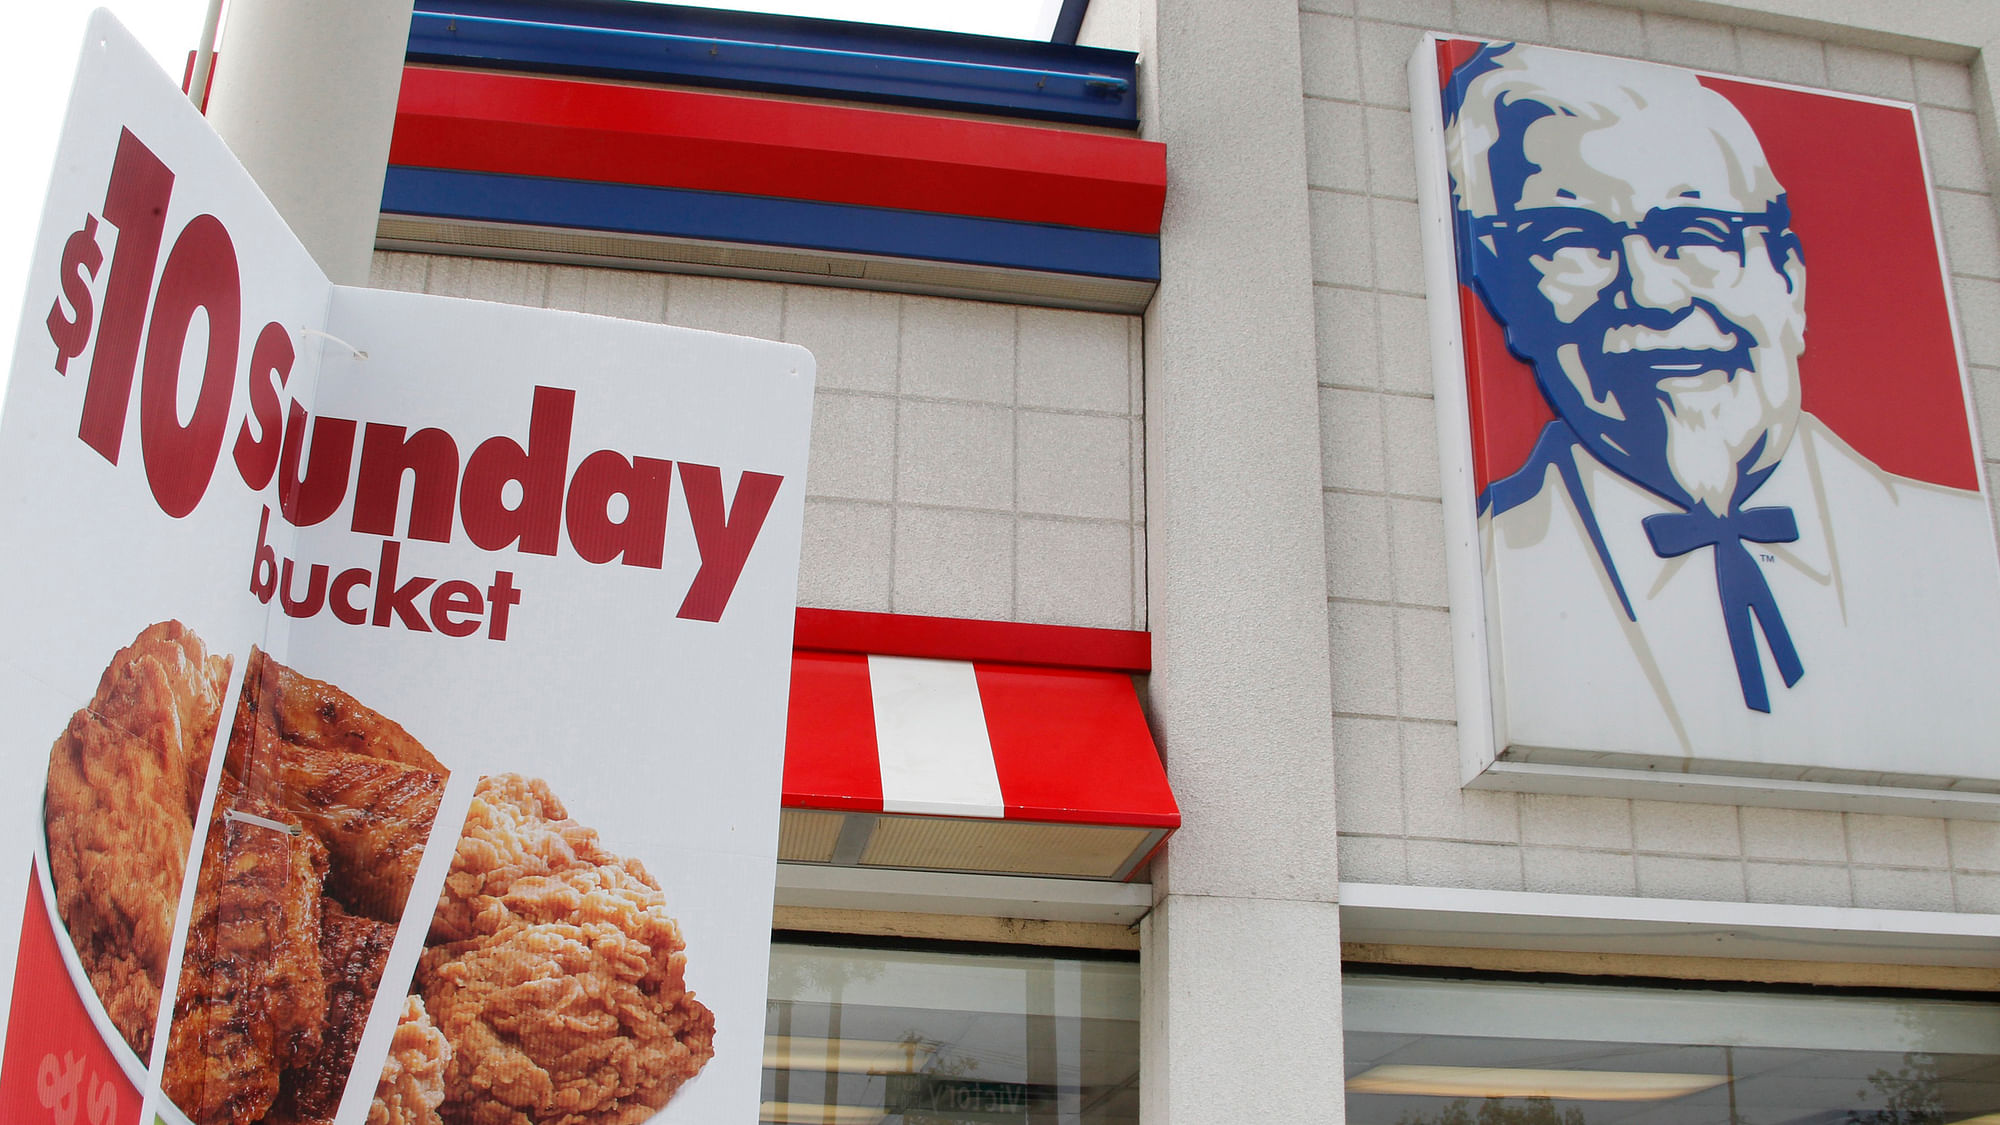 KFC is the world’s largest chain of fried chicken restaurants.